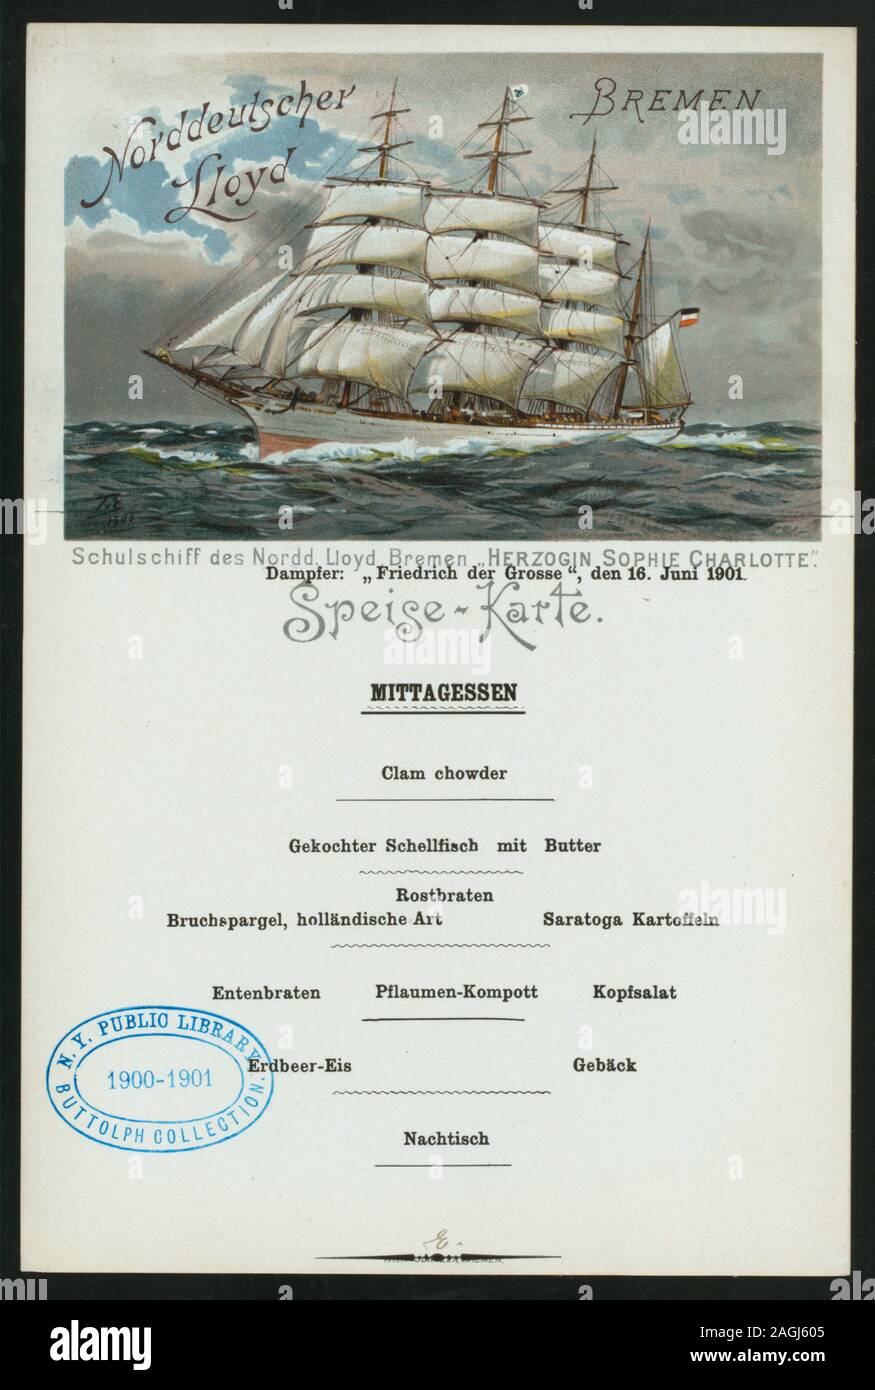 GERMAN ONLY; ILLUSTRATION OF LARGE SAILBOAT AT SEA; COULD POSSIBLY BE MEAL OF ANOTHER CLASS; ALSO A POSTCARD Citation/Reference: 1901-1672; MITTAGESSEN [held by] NORDDEUTSCHER LLOYD BREMEN [at] SS FRIEDRICH DER GROSSE (SS;) Stock Photo